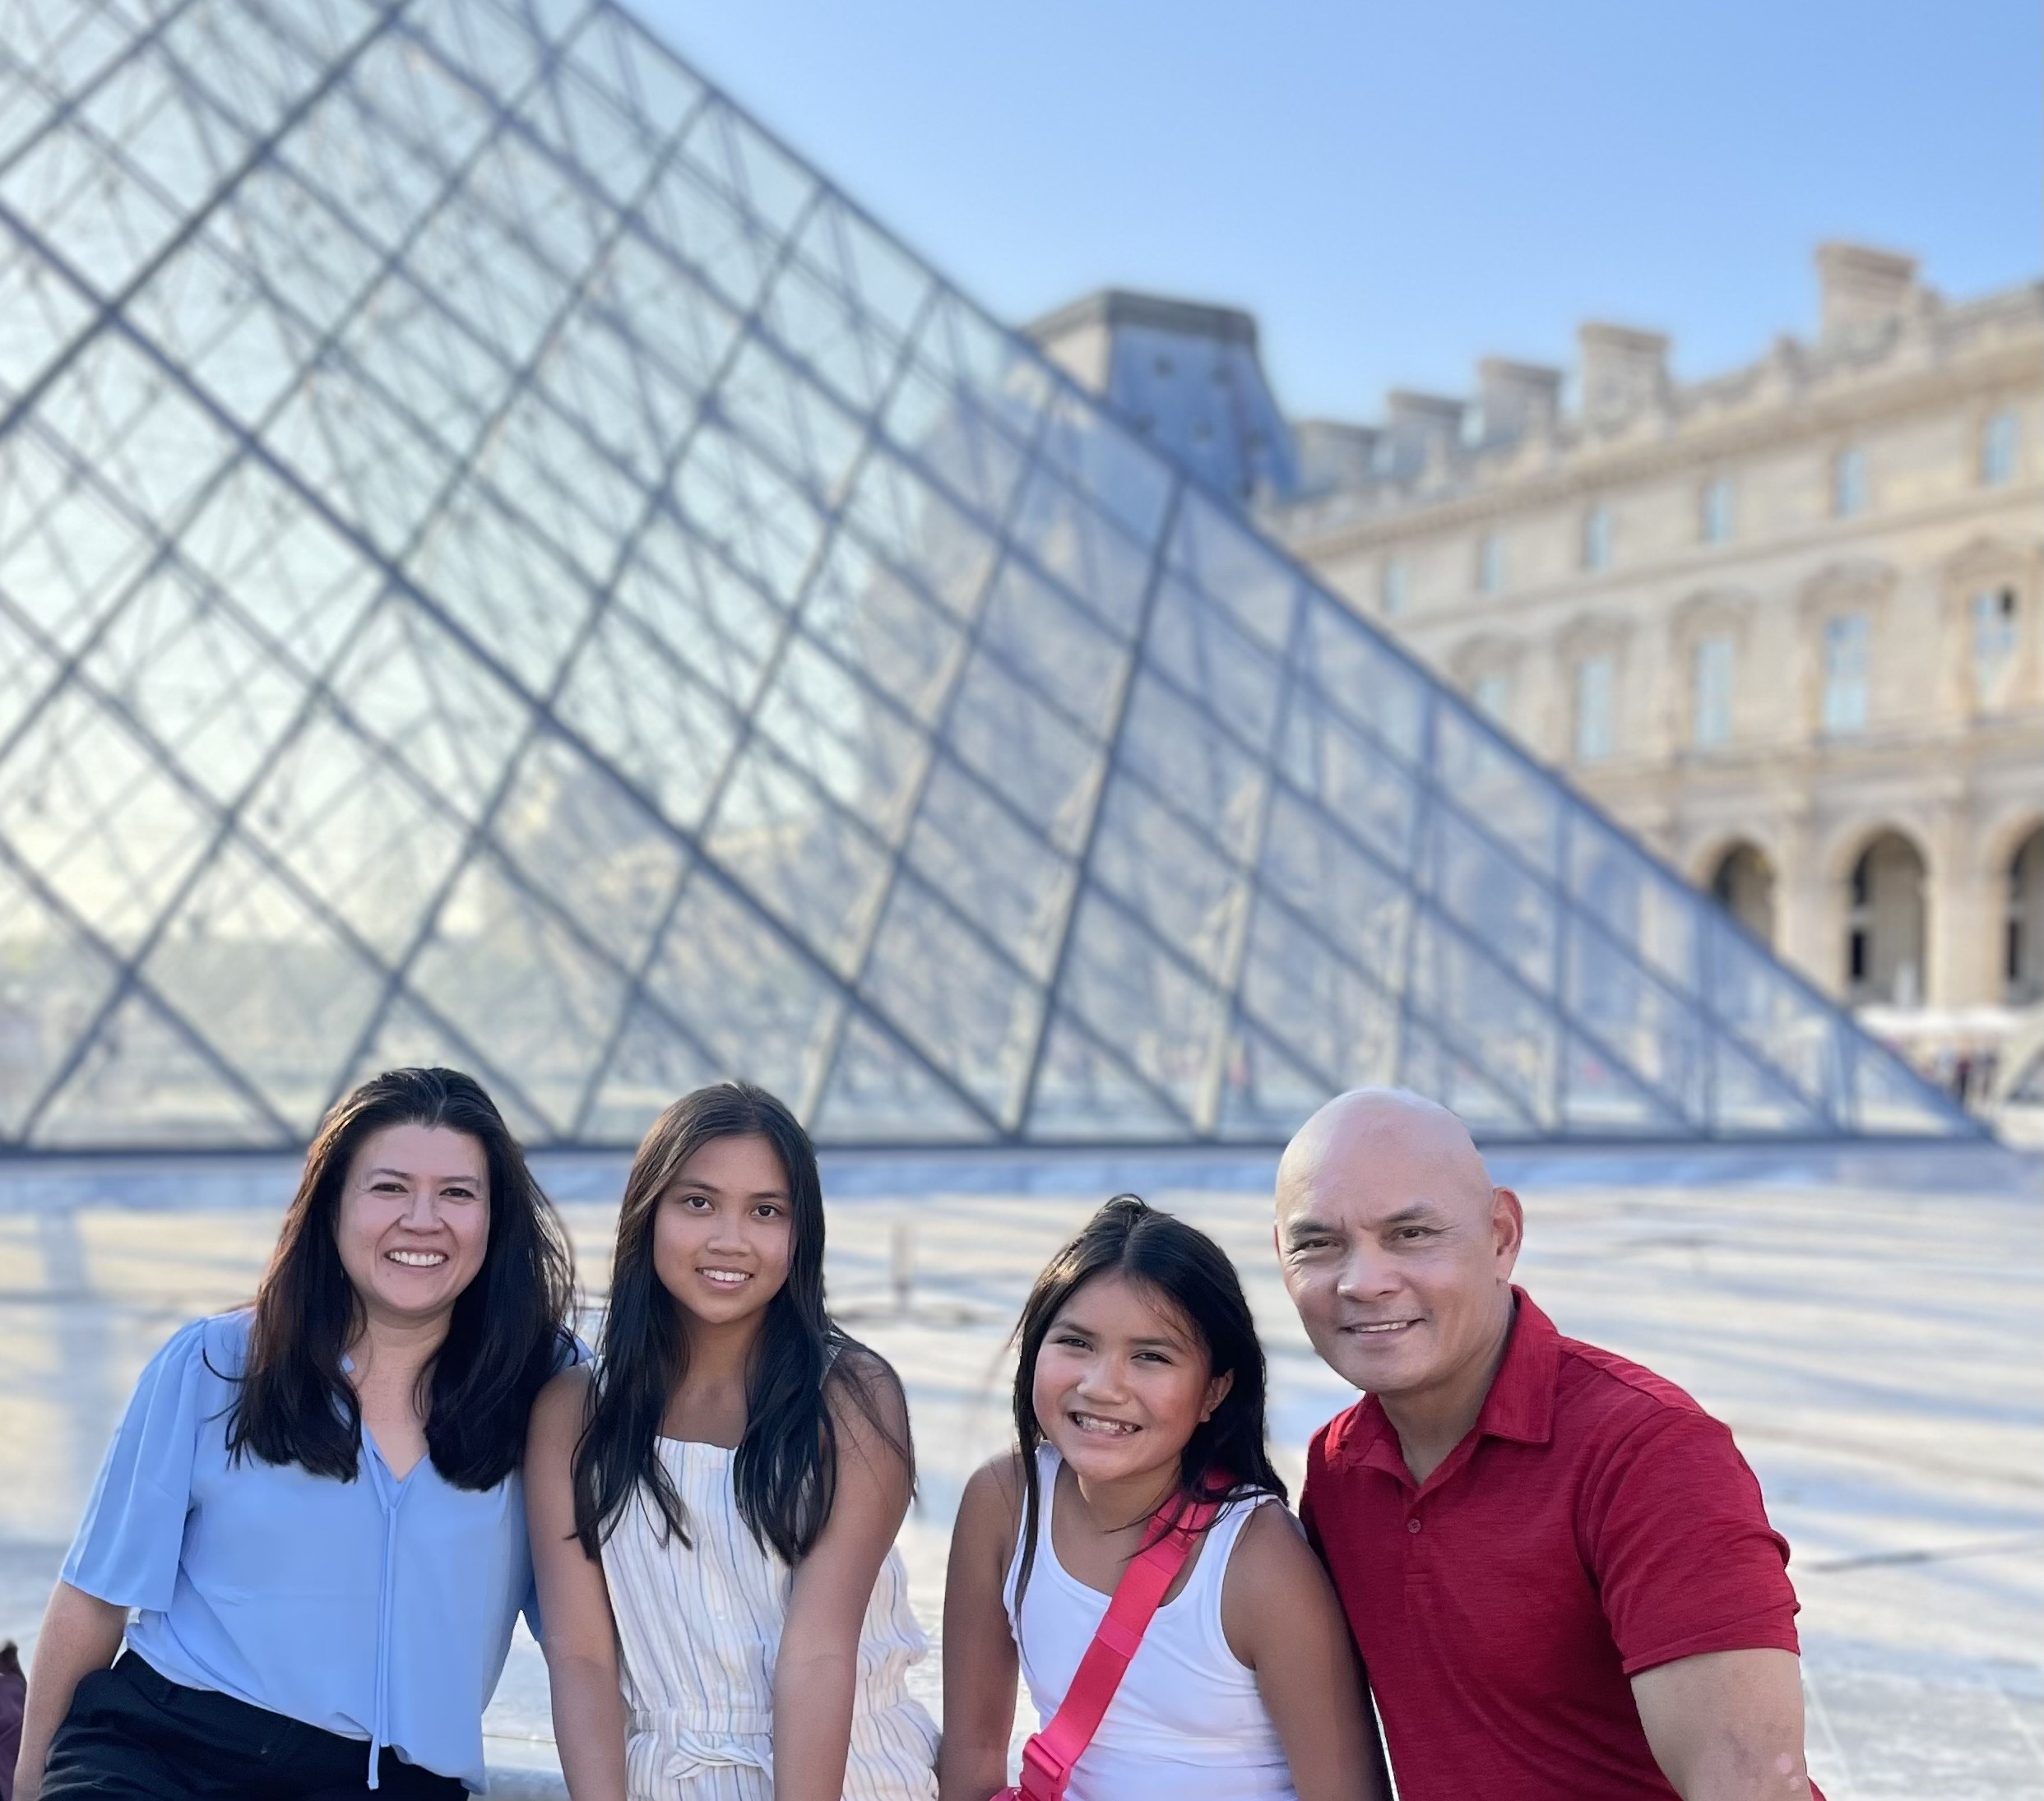 Ed Tugade and his family -- wife, Anna, and daughters, Audrey and Katherine -- at the Louvre in Paris.